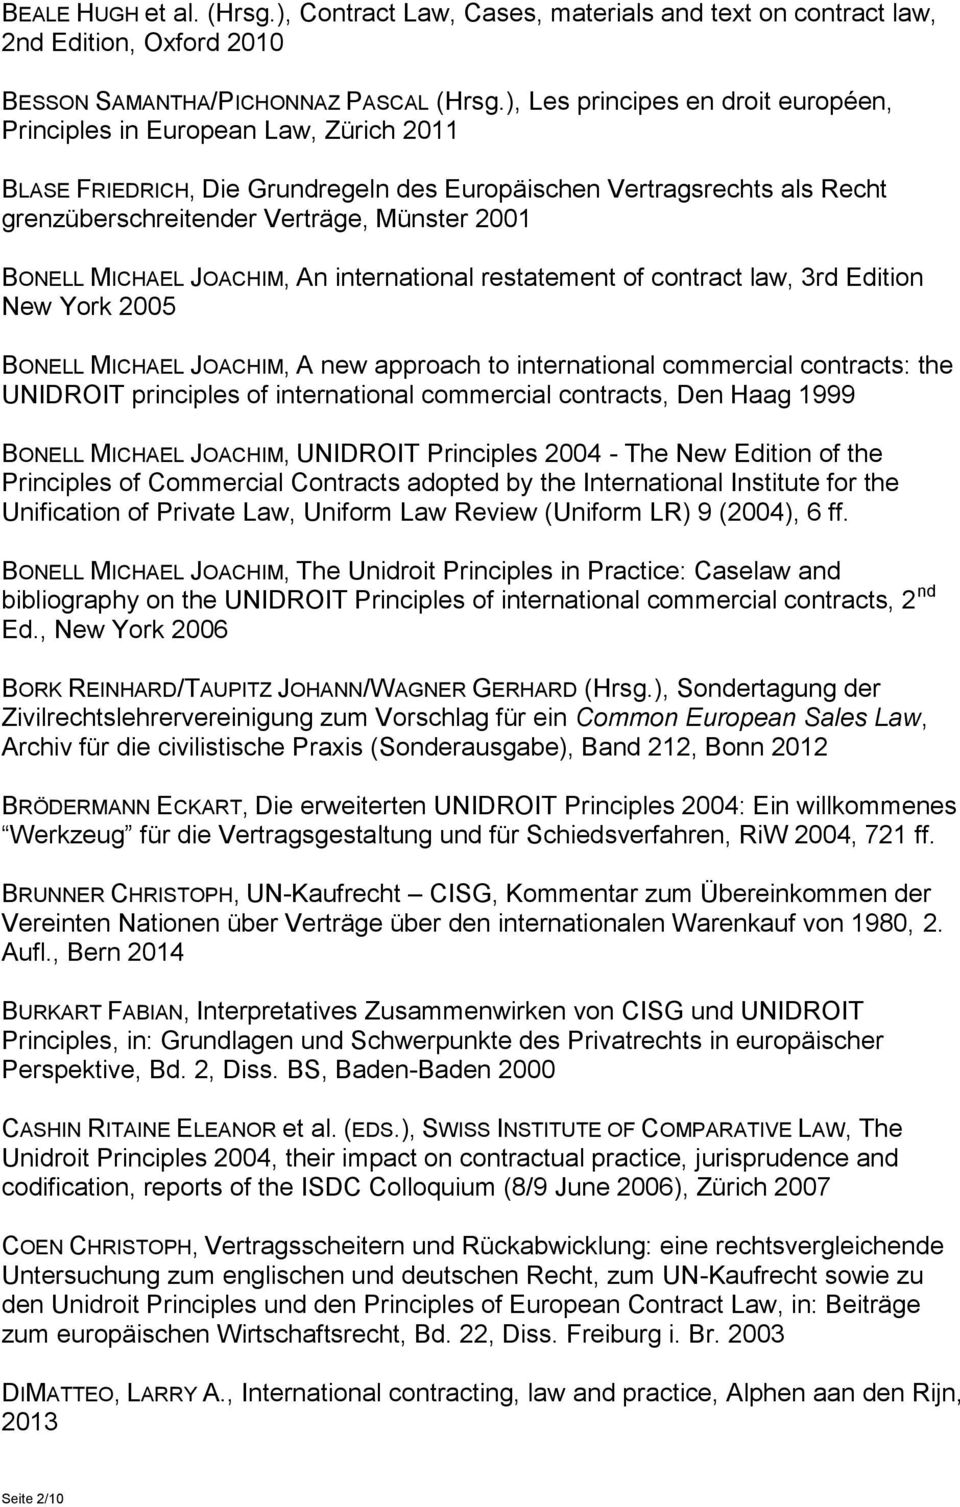 BONELL MICHAEL JOACHIM, An international restatement of contract law, 3rd Edition New York 2005 BONELL MICHAEL JOACHIM, A new approach to international commercial contracts: the UNIDROIT principles